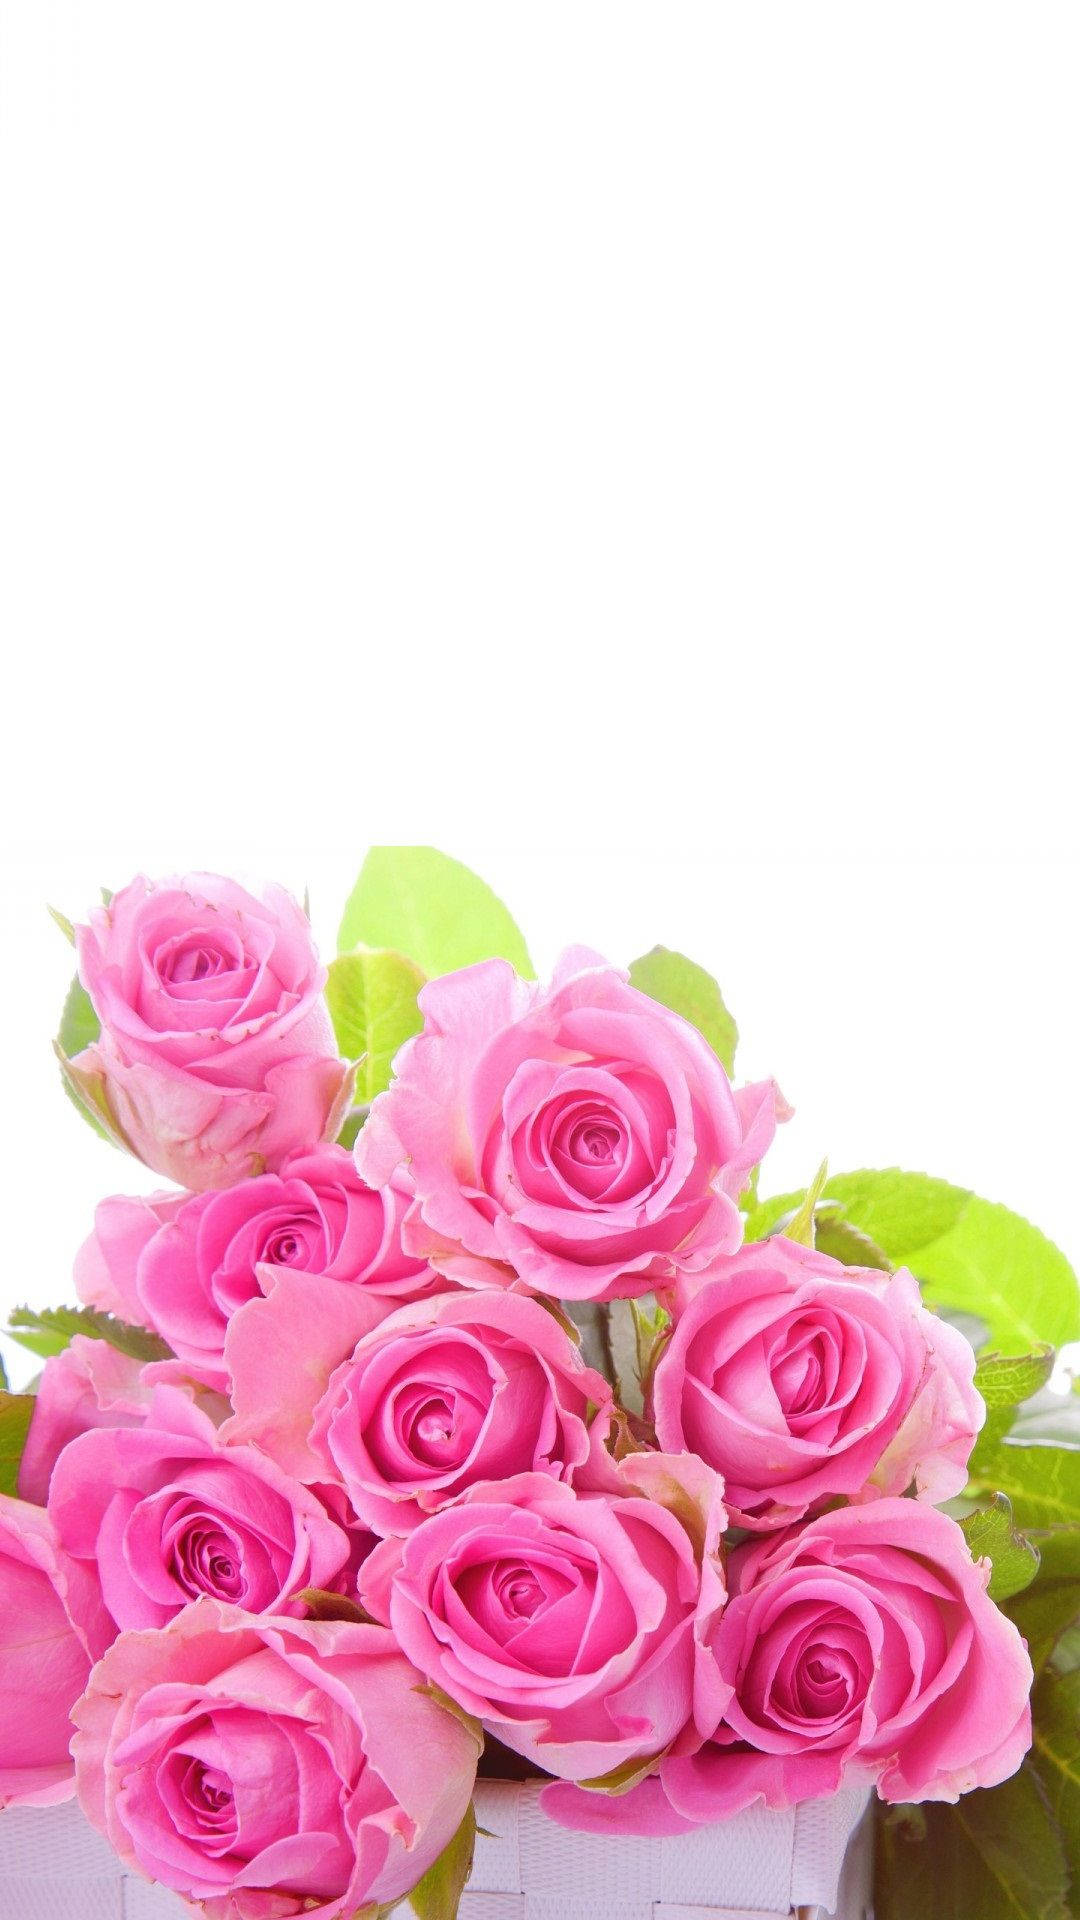 A beautiful bouquet of pink roses Wallpaper